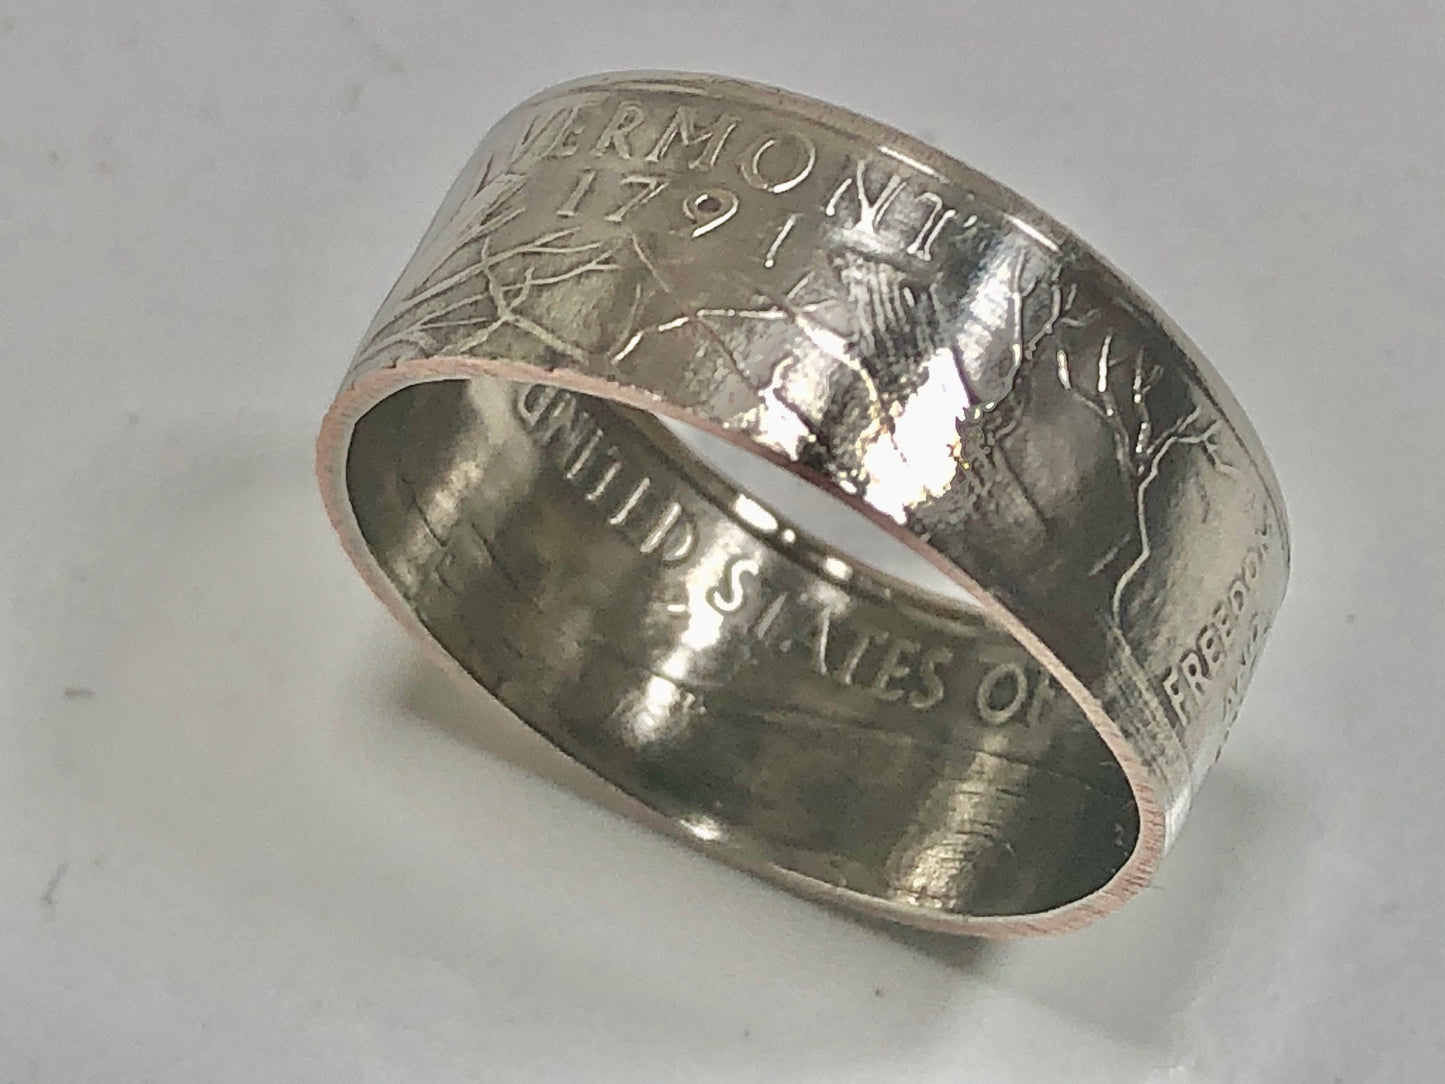 Vermont Ring State Quarter Coin Ring